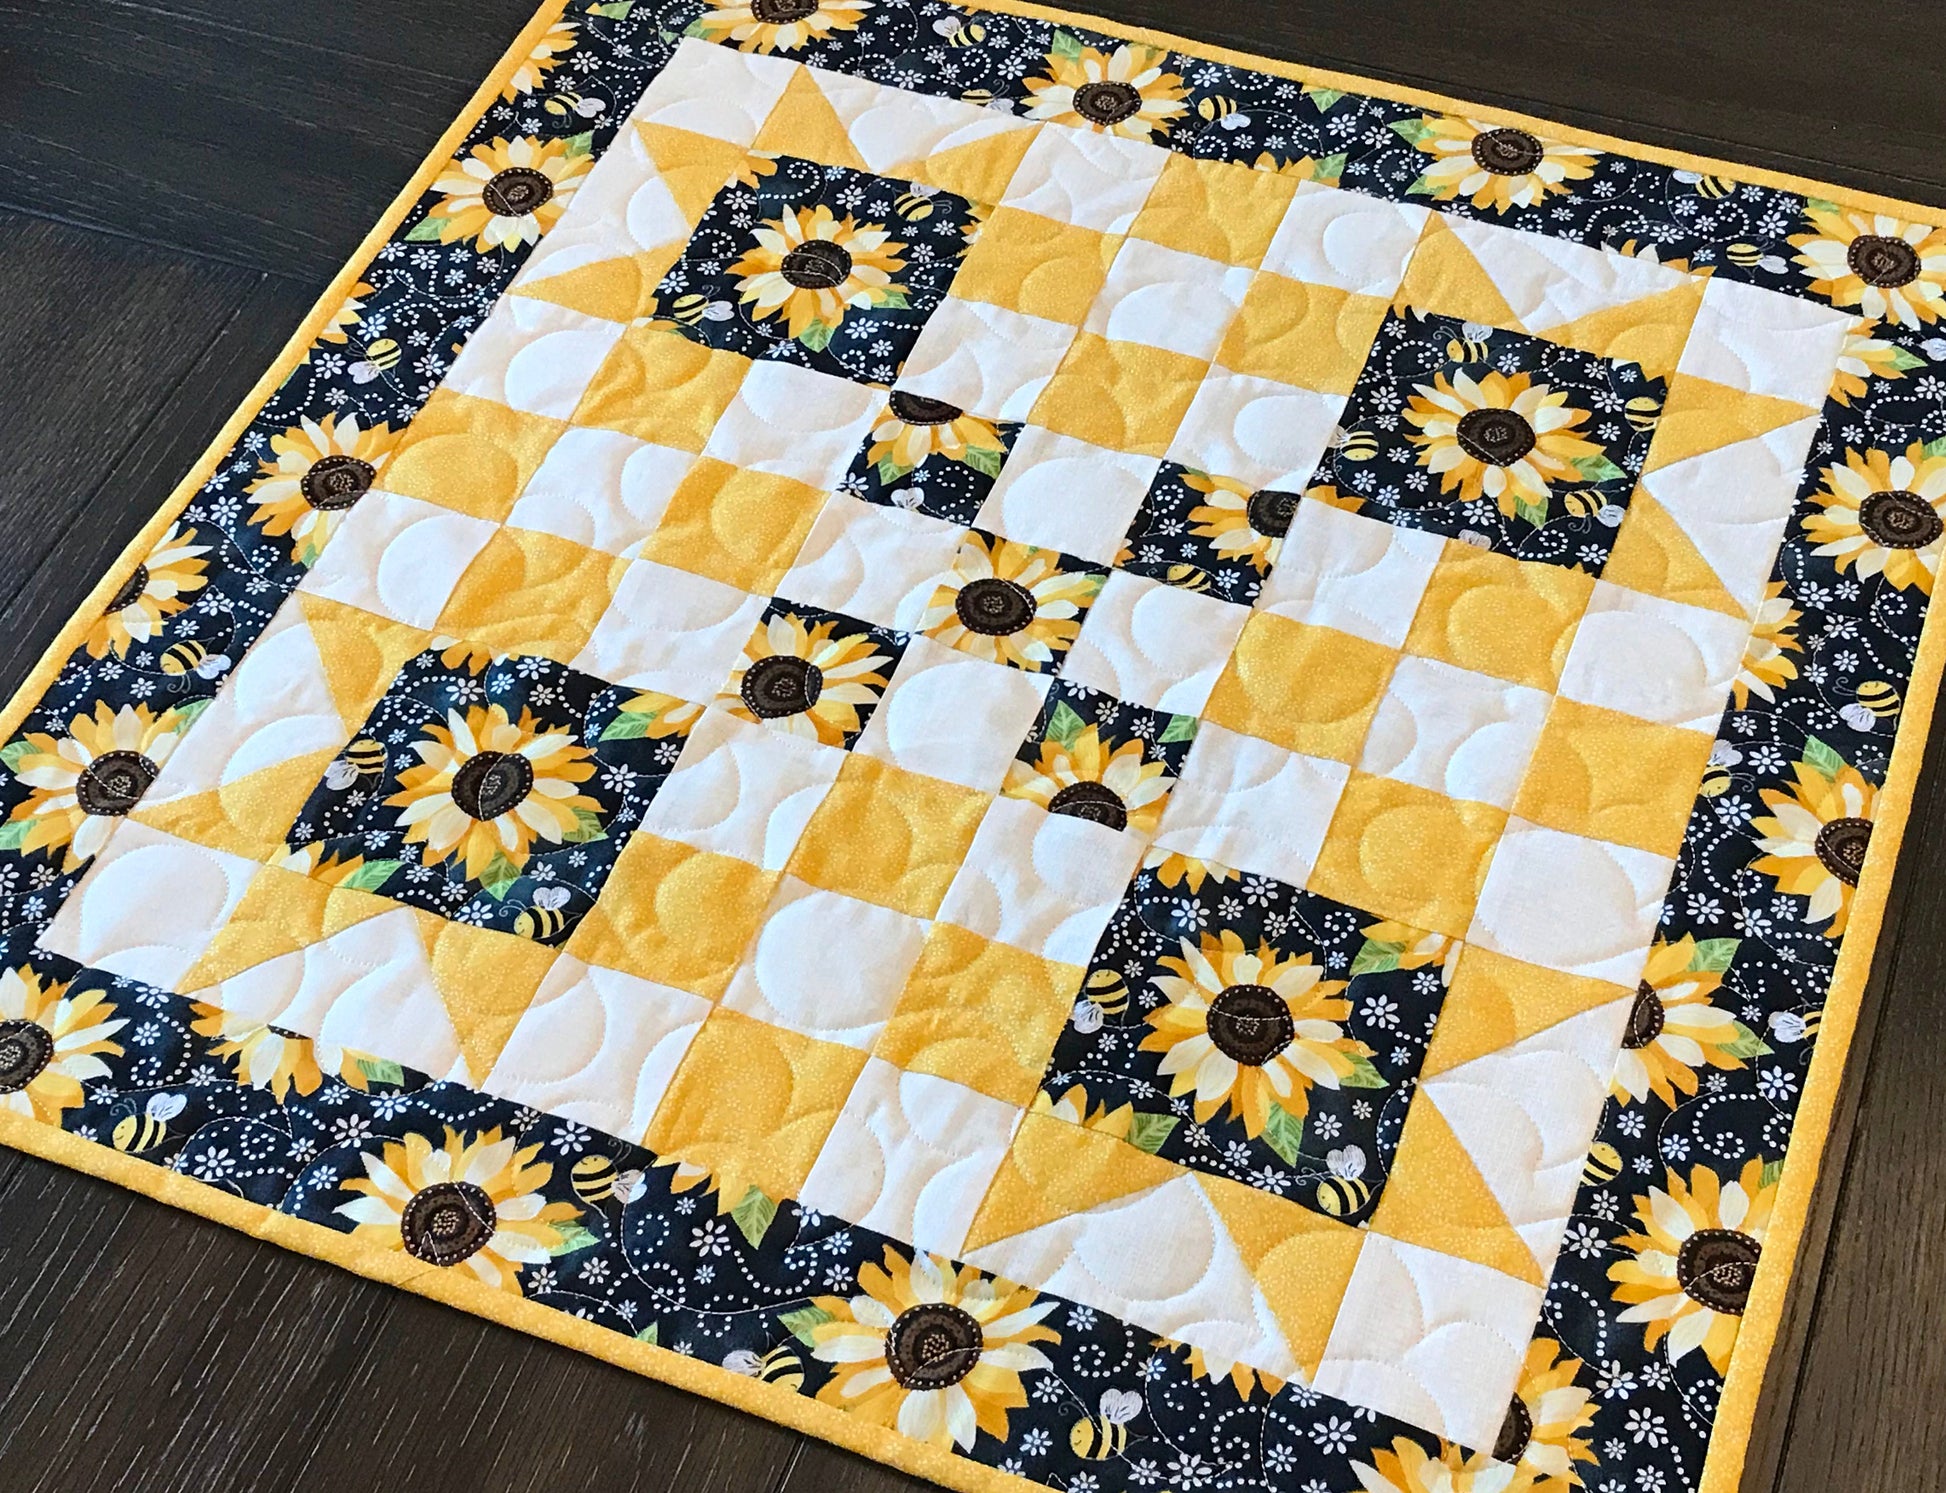 table topper shown on a table for pattern for a table runner or table topper that has sawtooth star corner units with nine patch blocks in between.